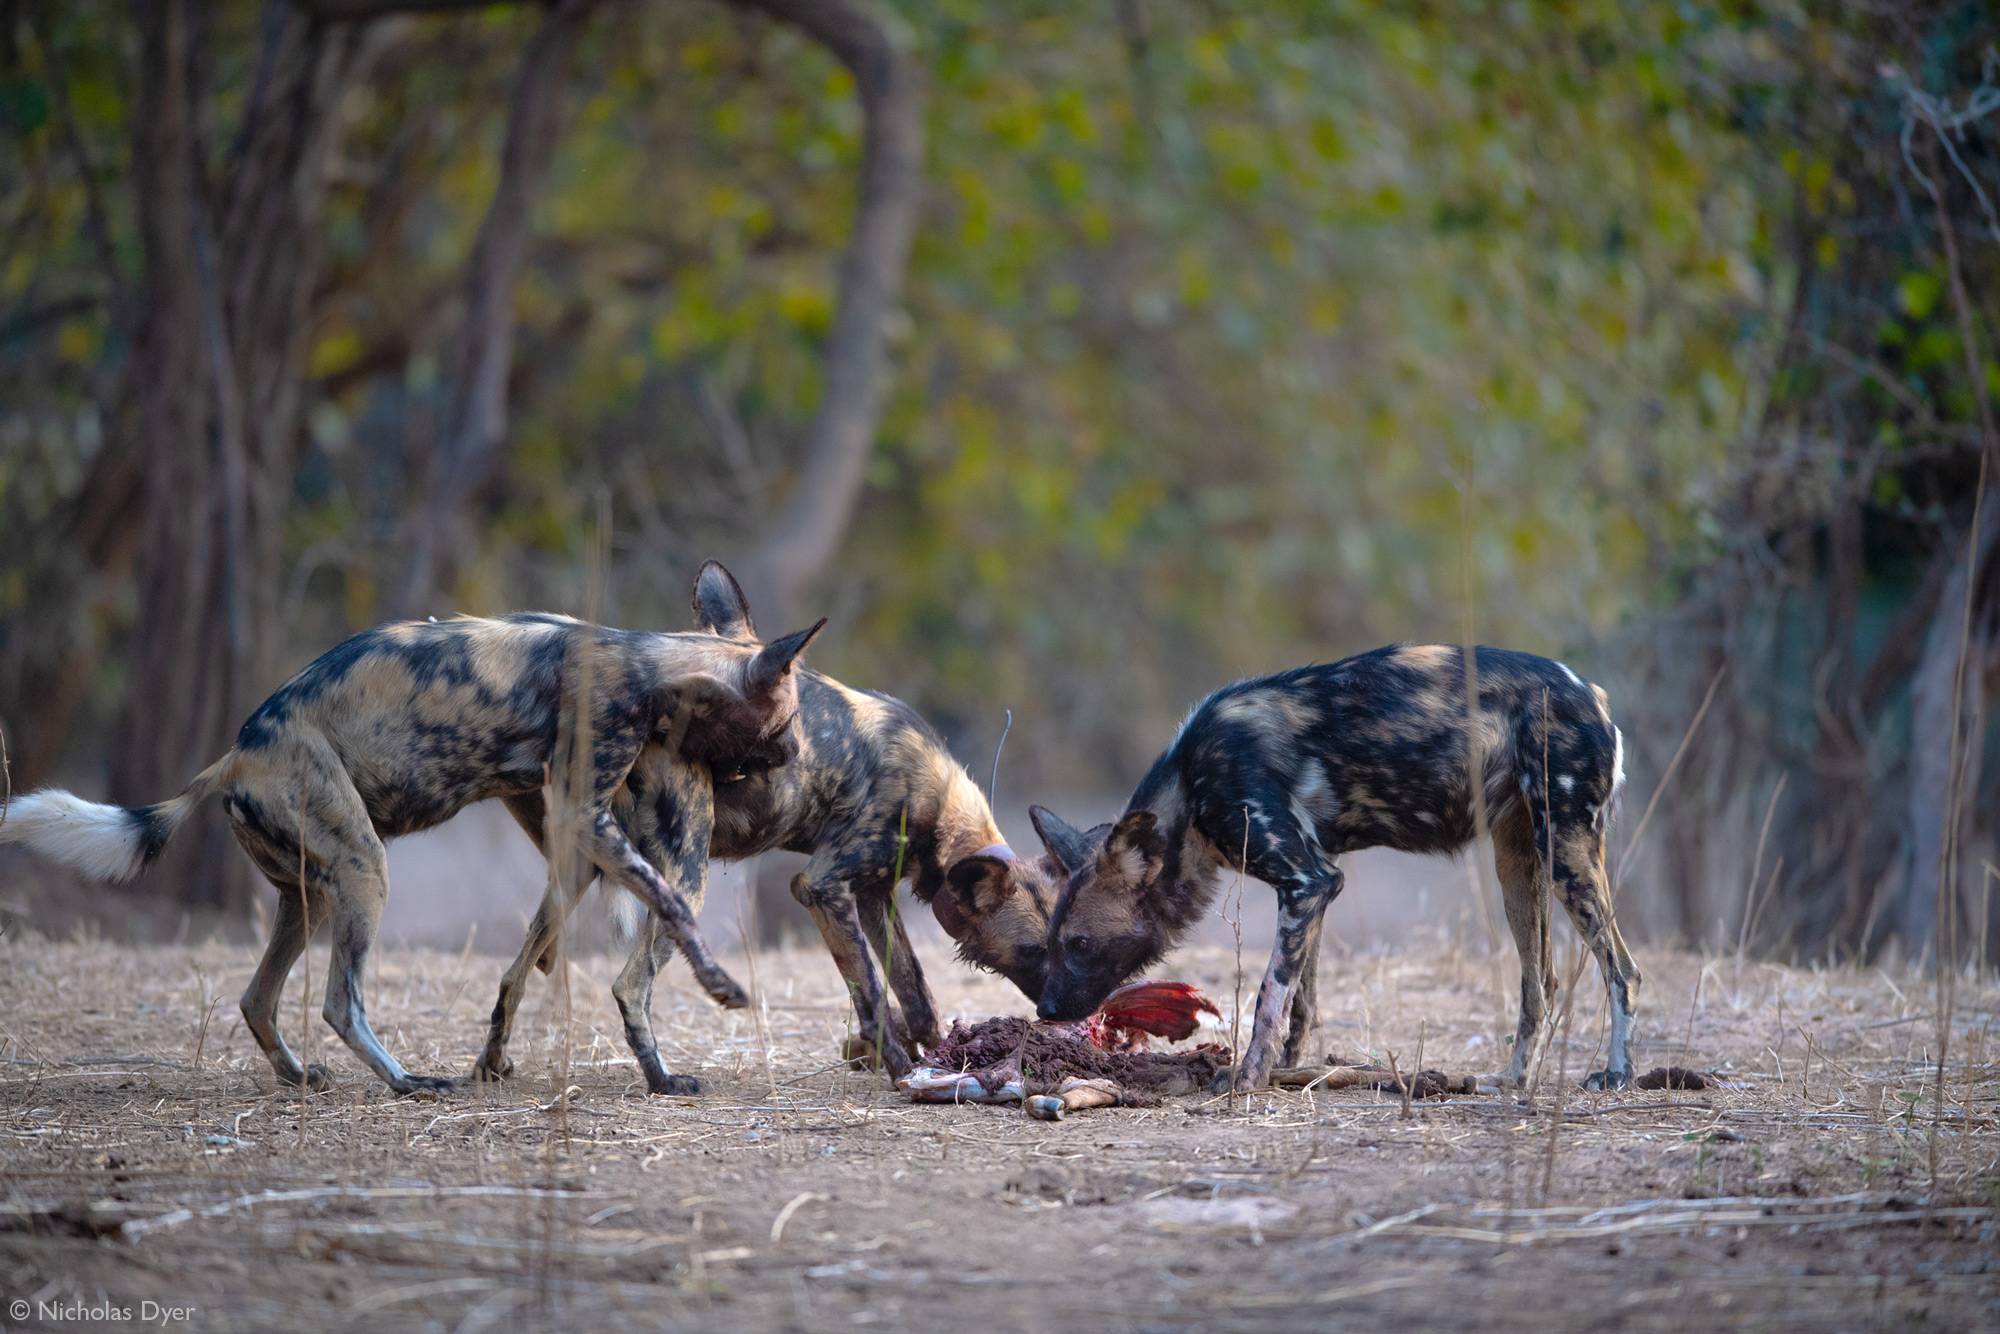 Three painted wolves, African wild dogs in Mana Pools National Park, Zimbabwe